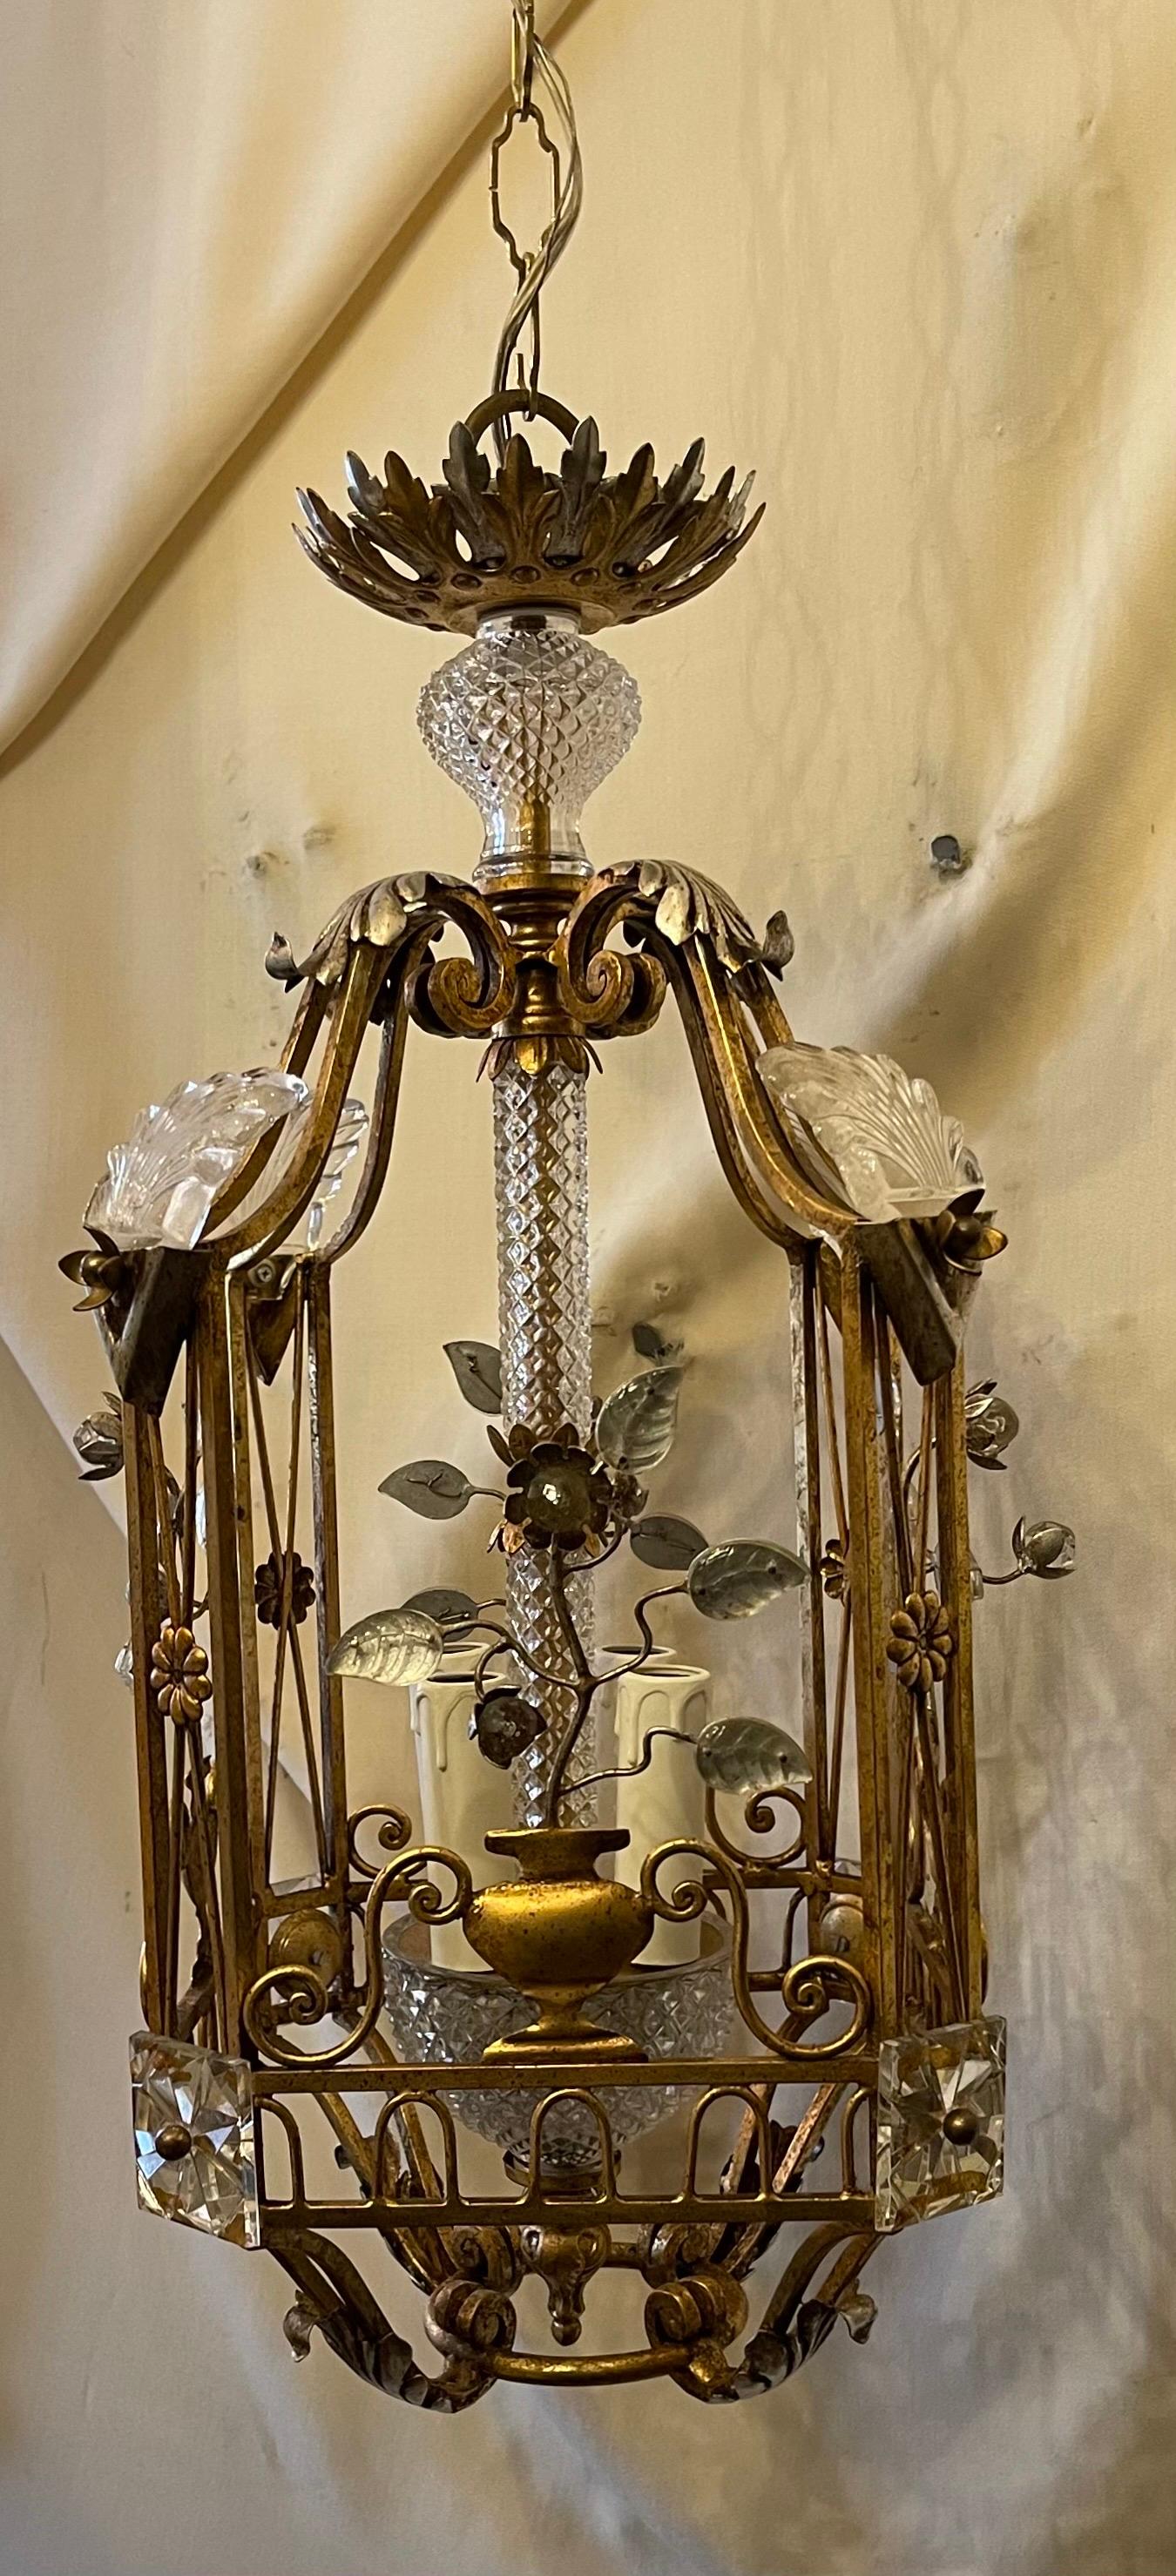 A very fine mid-century modern French gold gilt Maison Baguès style square crystal adorned lantern pagoda basket form 4 candelabra light chandelier / light fixture, we supply chain & canopy.